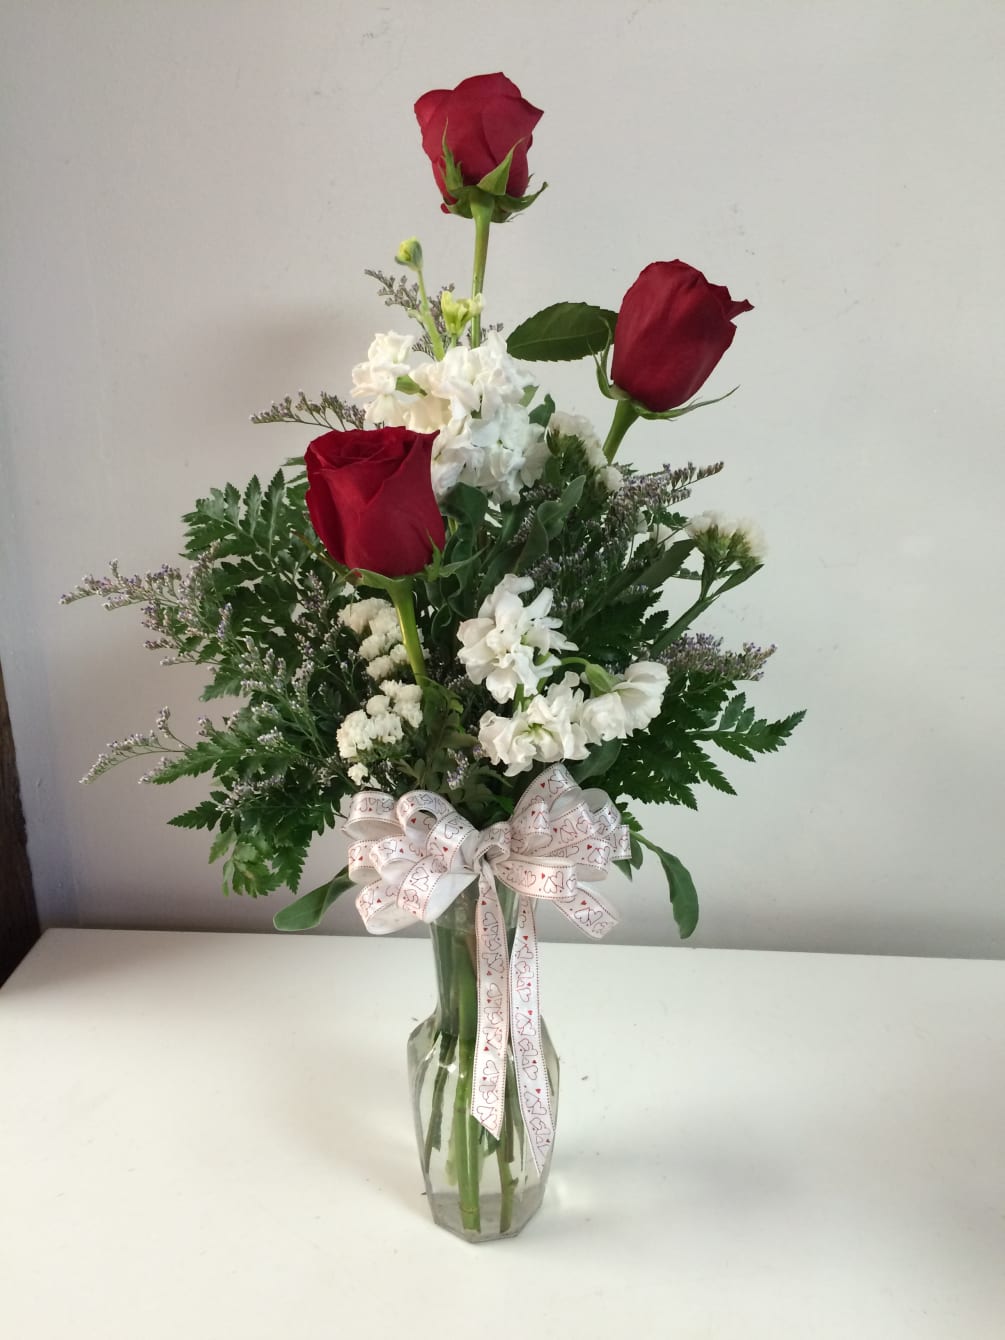 3 roses with accent flowers in a clear glass vase.  Includes